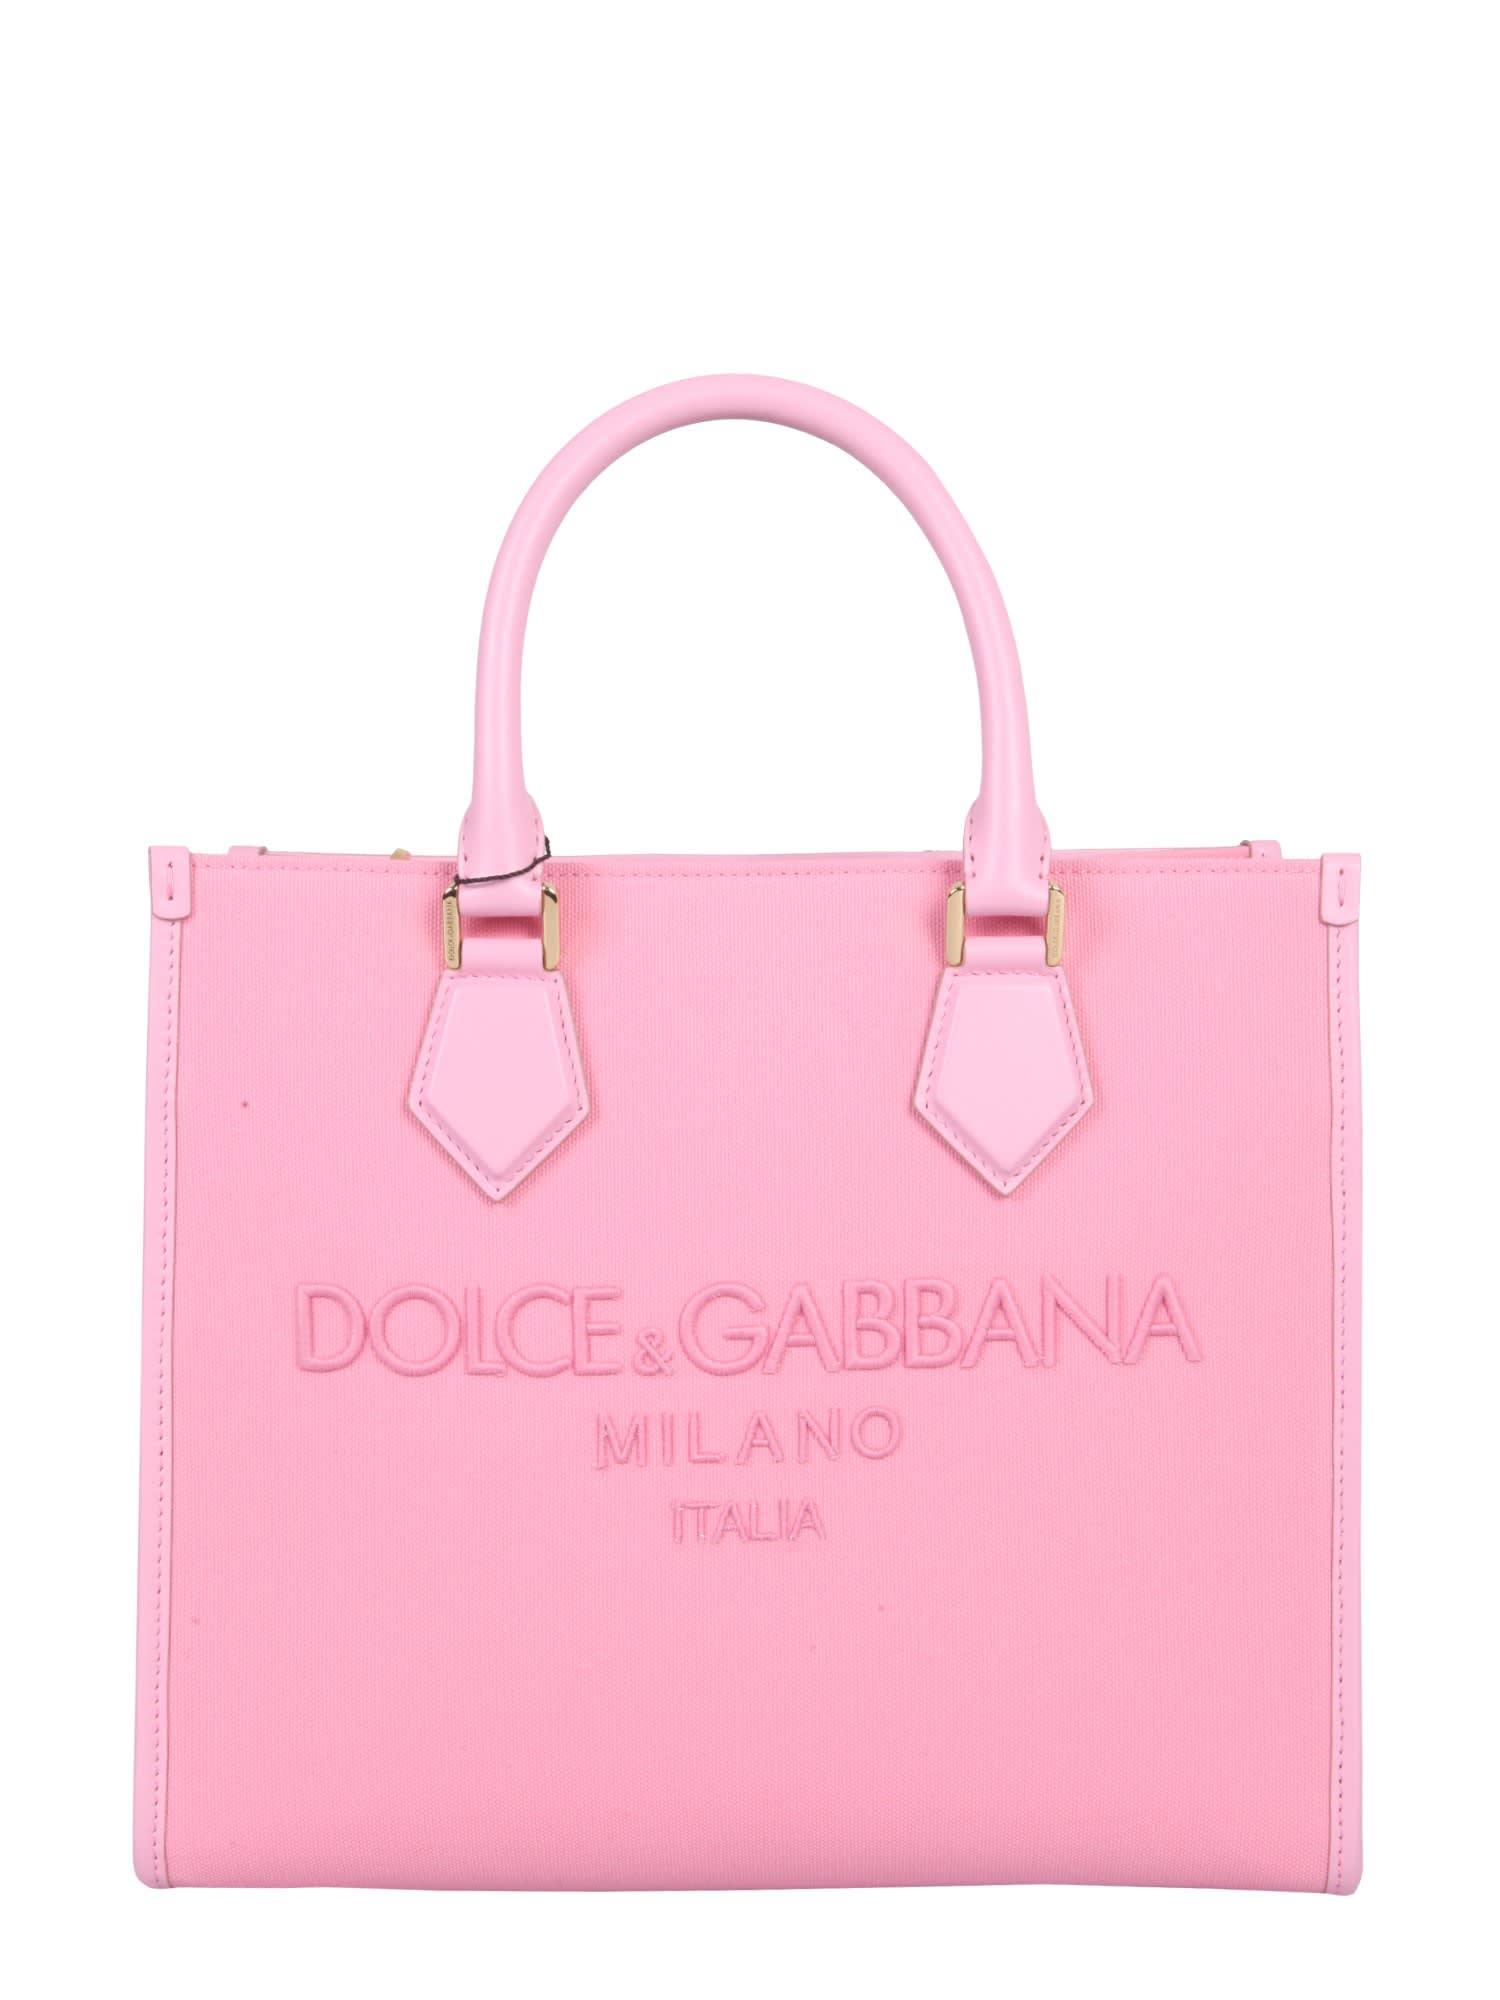 Dolce & Gabbana Canvas Shopping Bag in Pink | Lyst